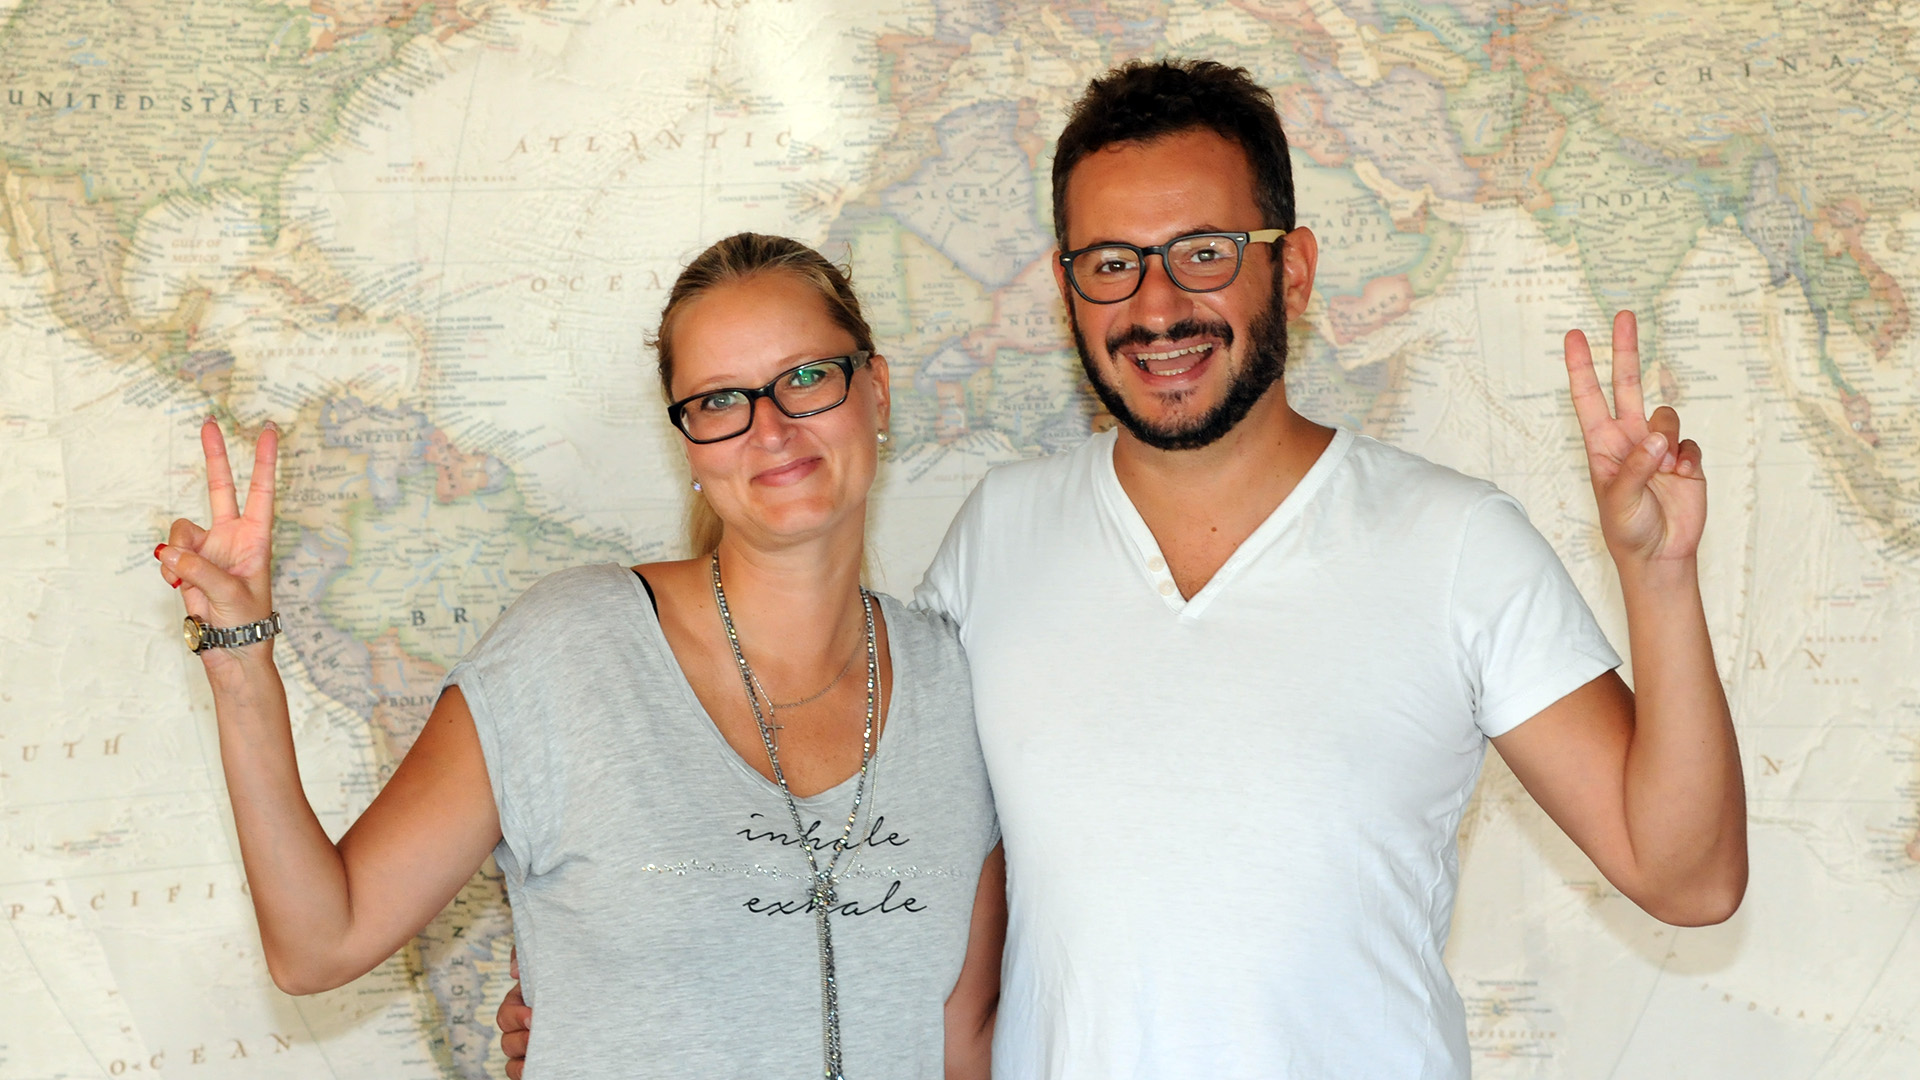 Two people standing in front of a ten foot wide map of the world, smiling and making peace signs